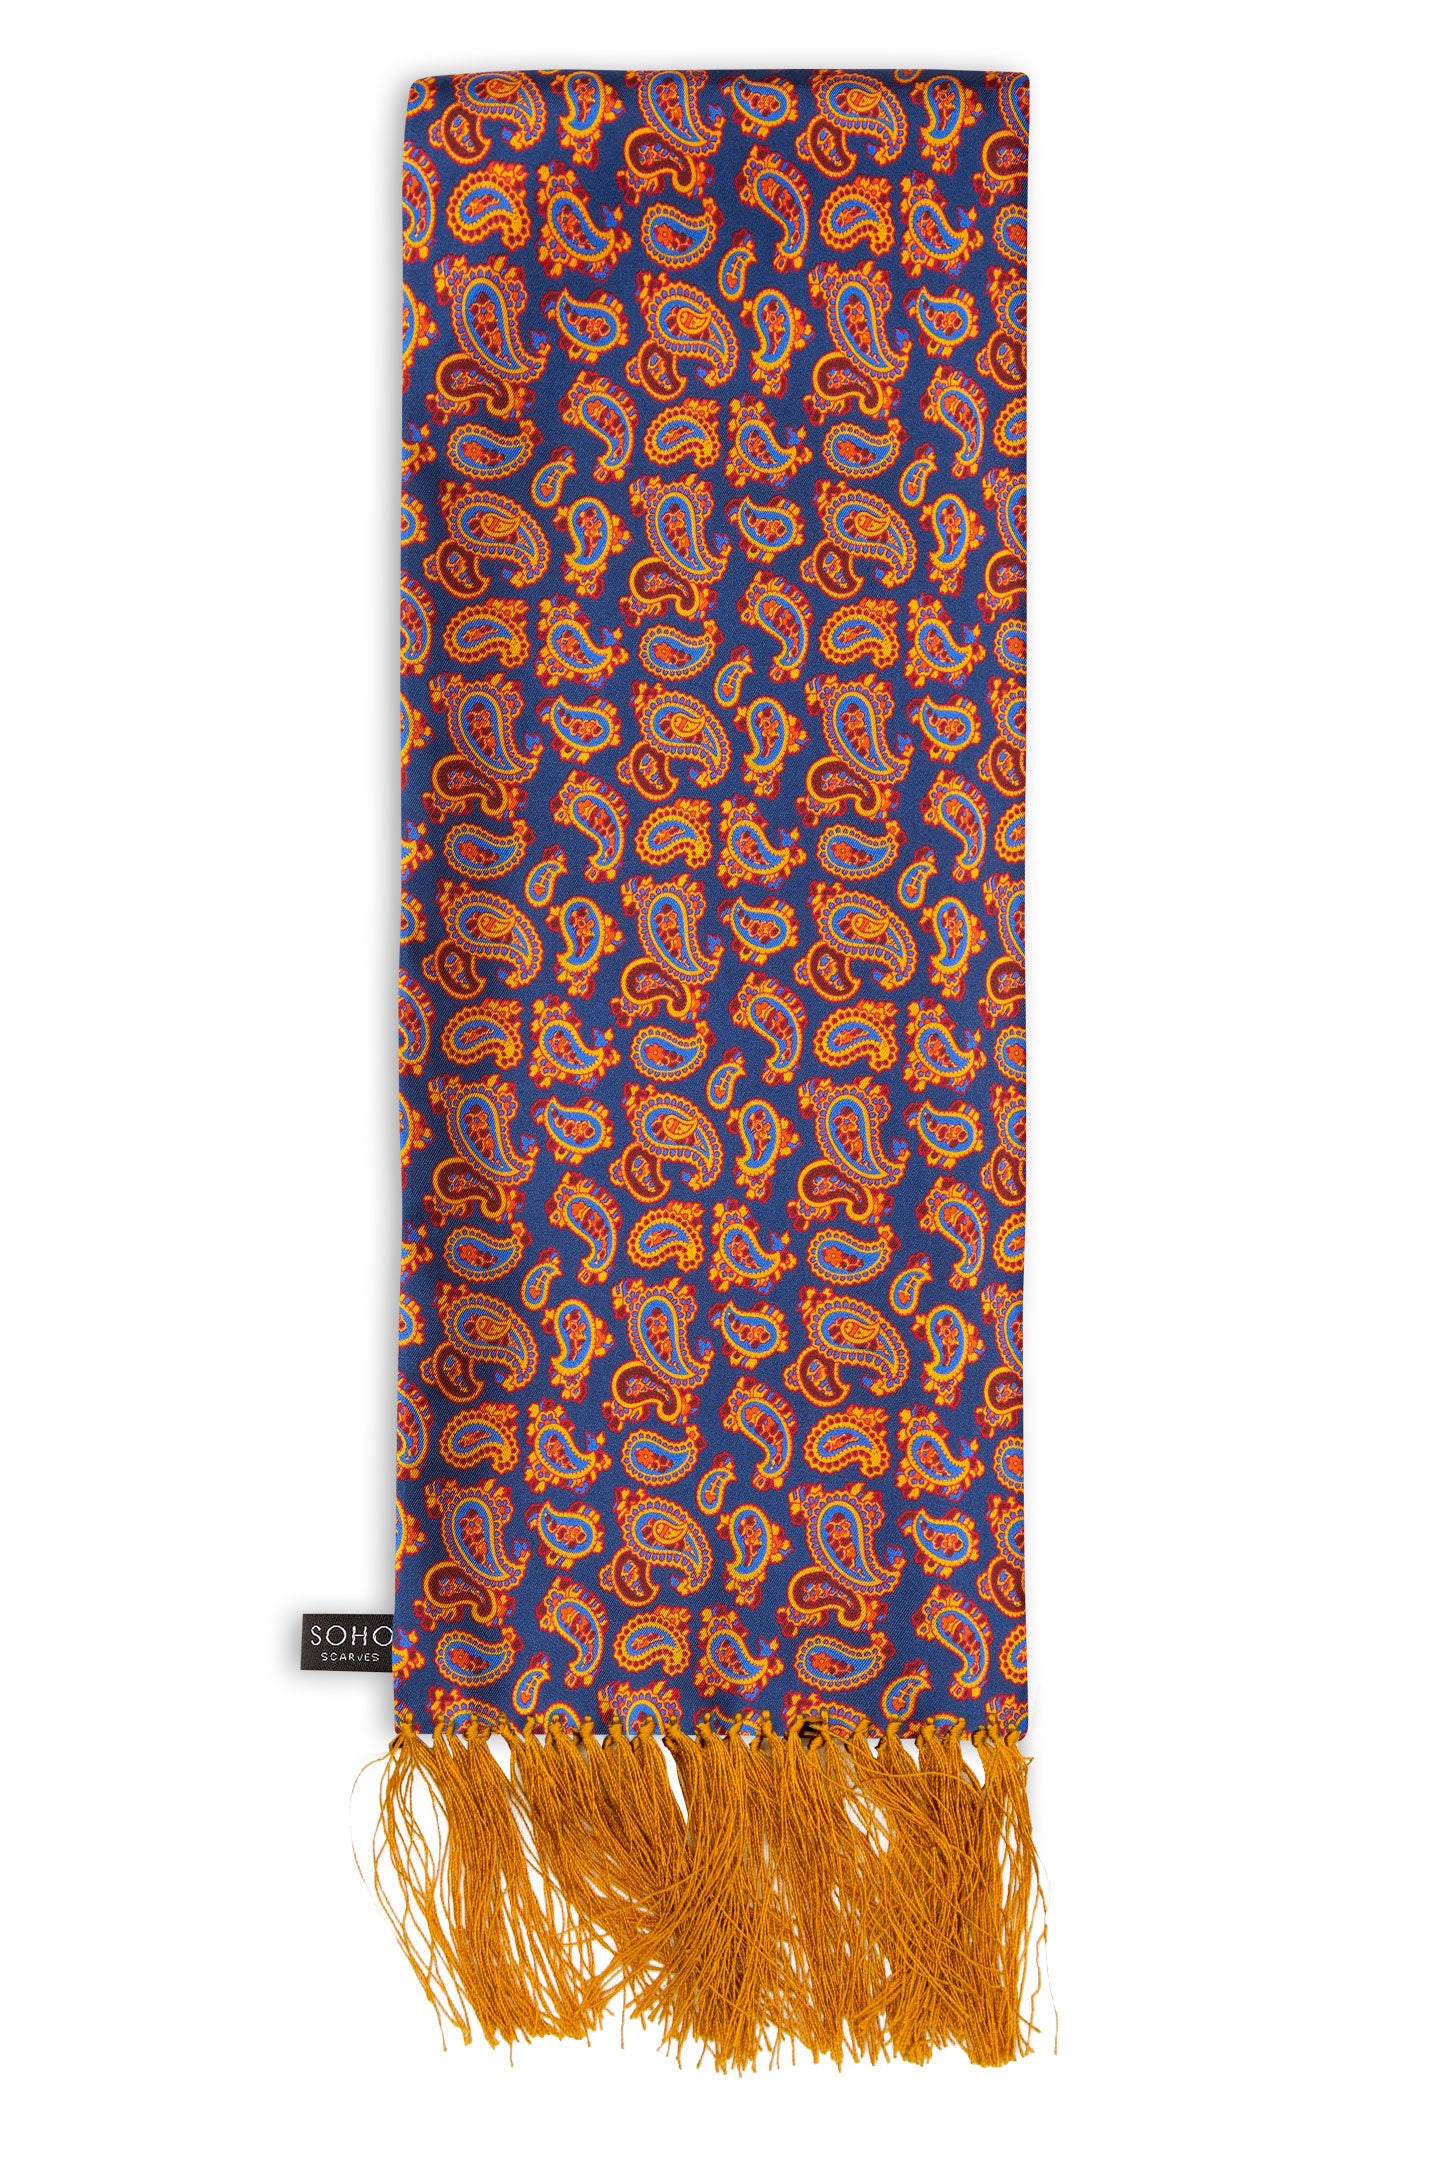 'The Kent Aviator' deep violet/blue silk scarf with small orange, red and royal blue paisley patterns, arranged in a rectangular shape, clearly showing the gold 3-inch fringe and the ‘Soho Scarves’ label on the left edge.